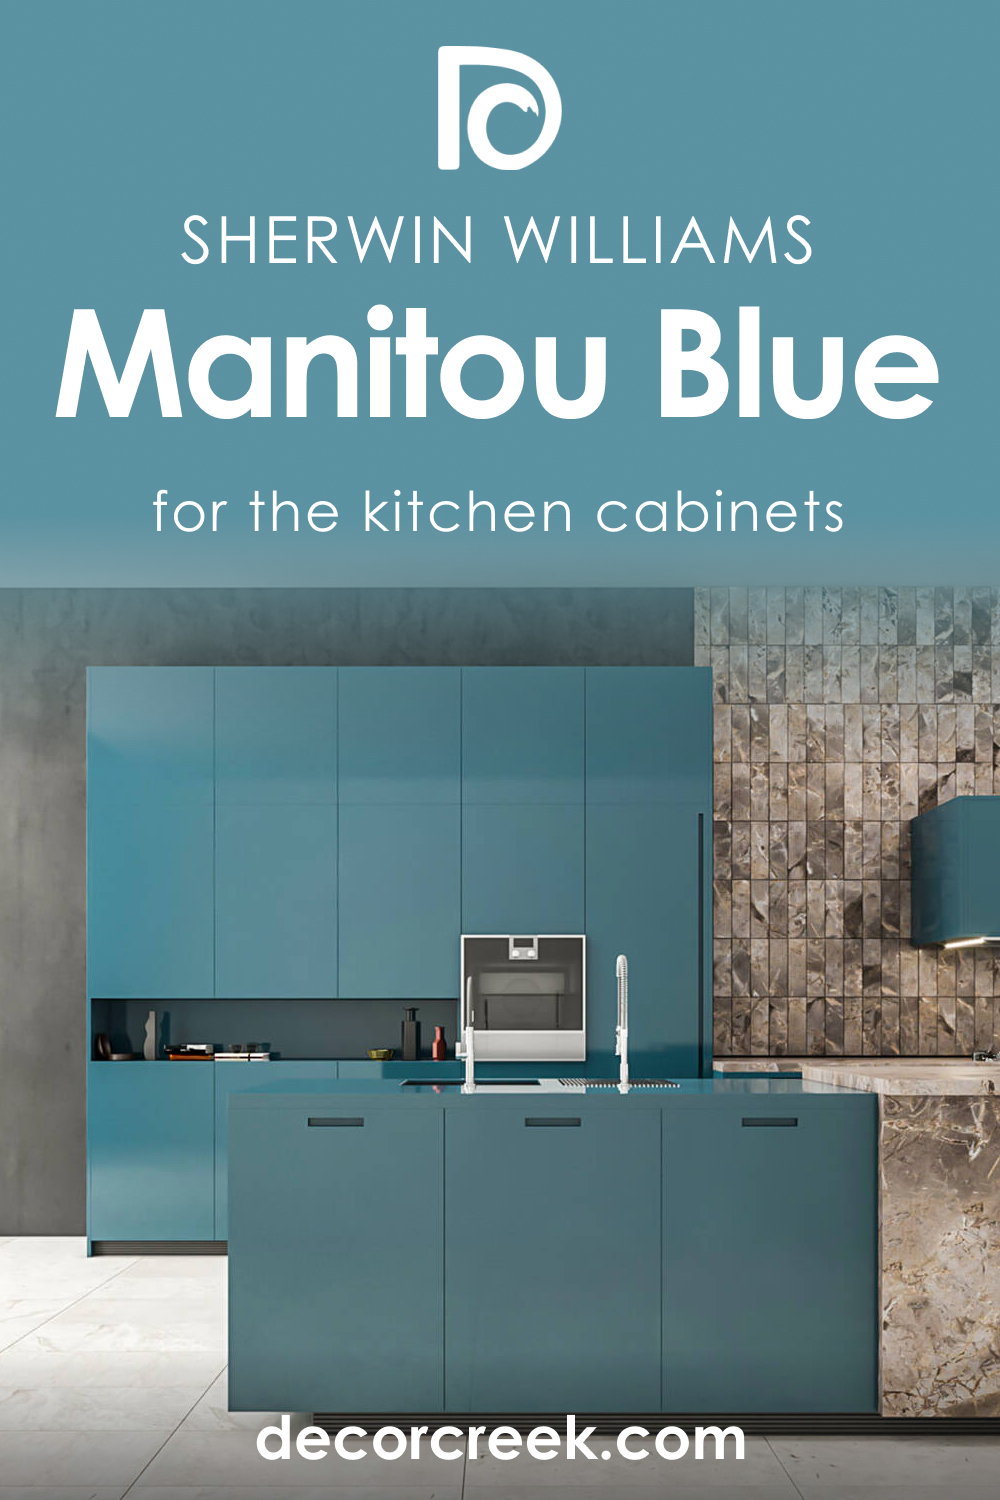 How to Use SW 6501 Manitou Blue for Kitchen Cabinets?